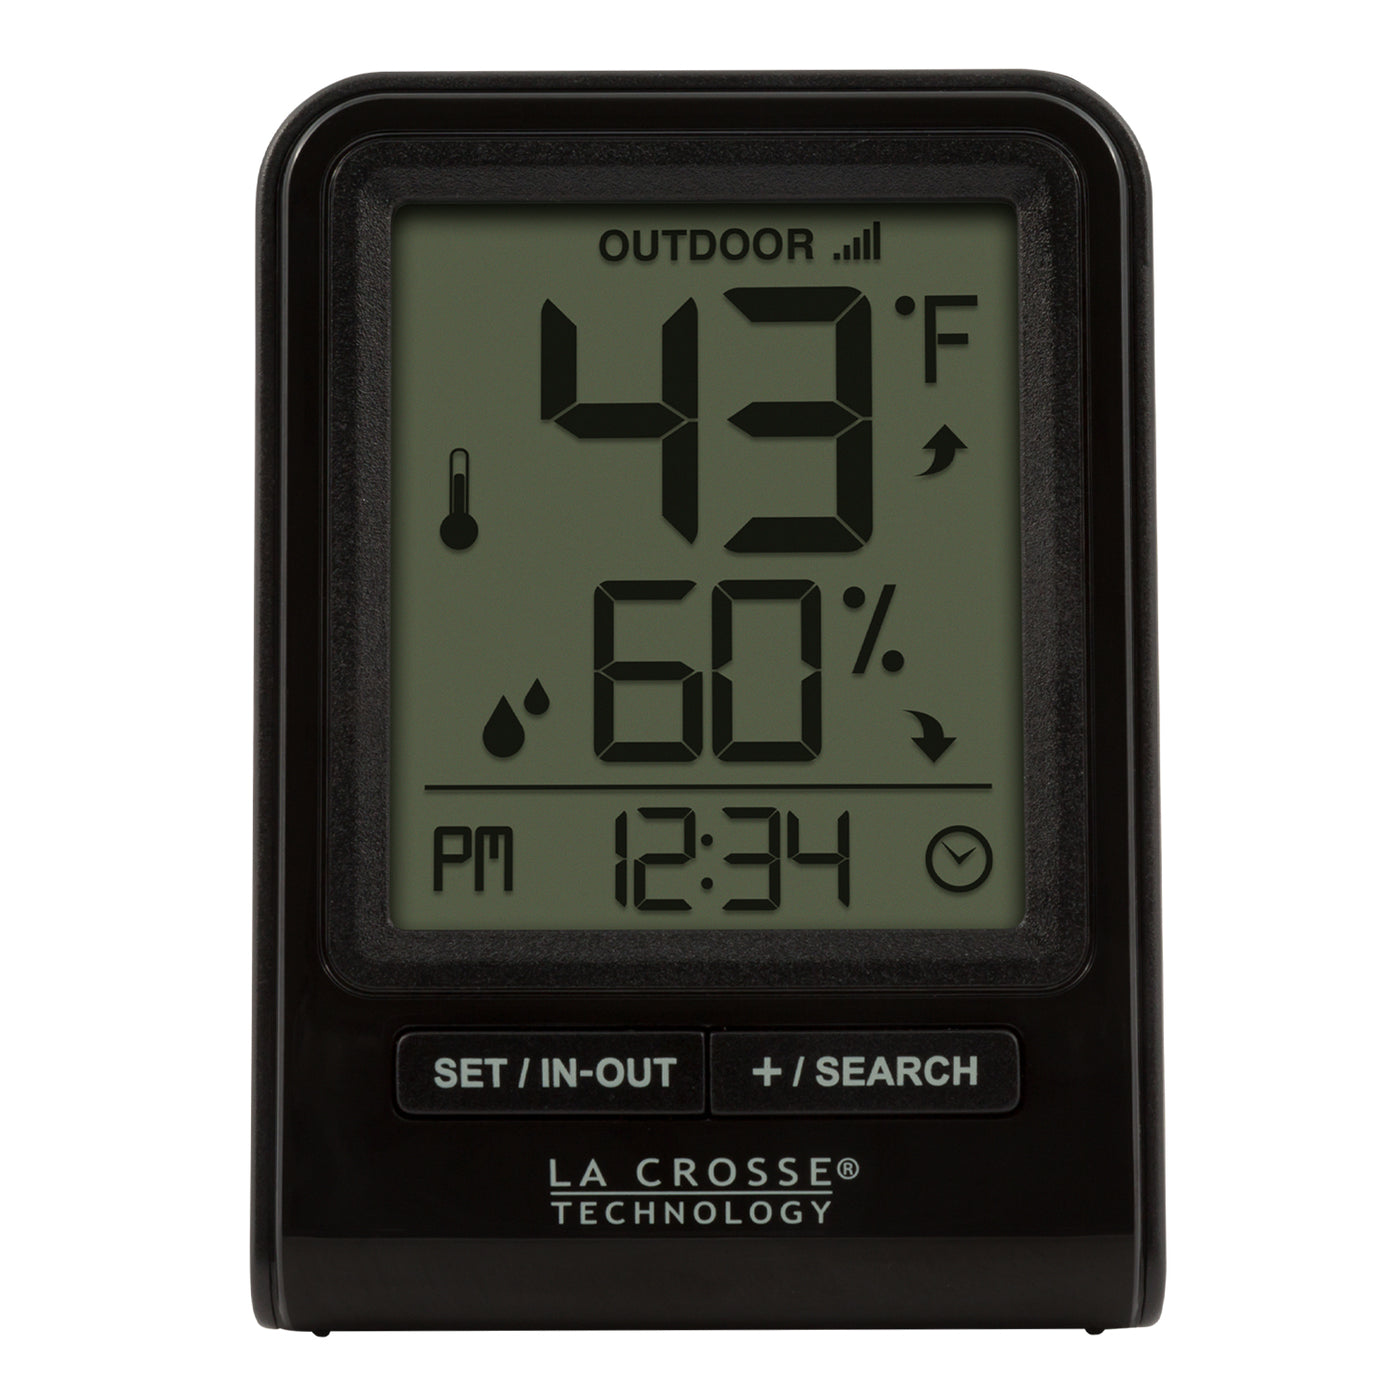 308-1409Th Add on Wireless Thermometer with Humidity Display